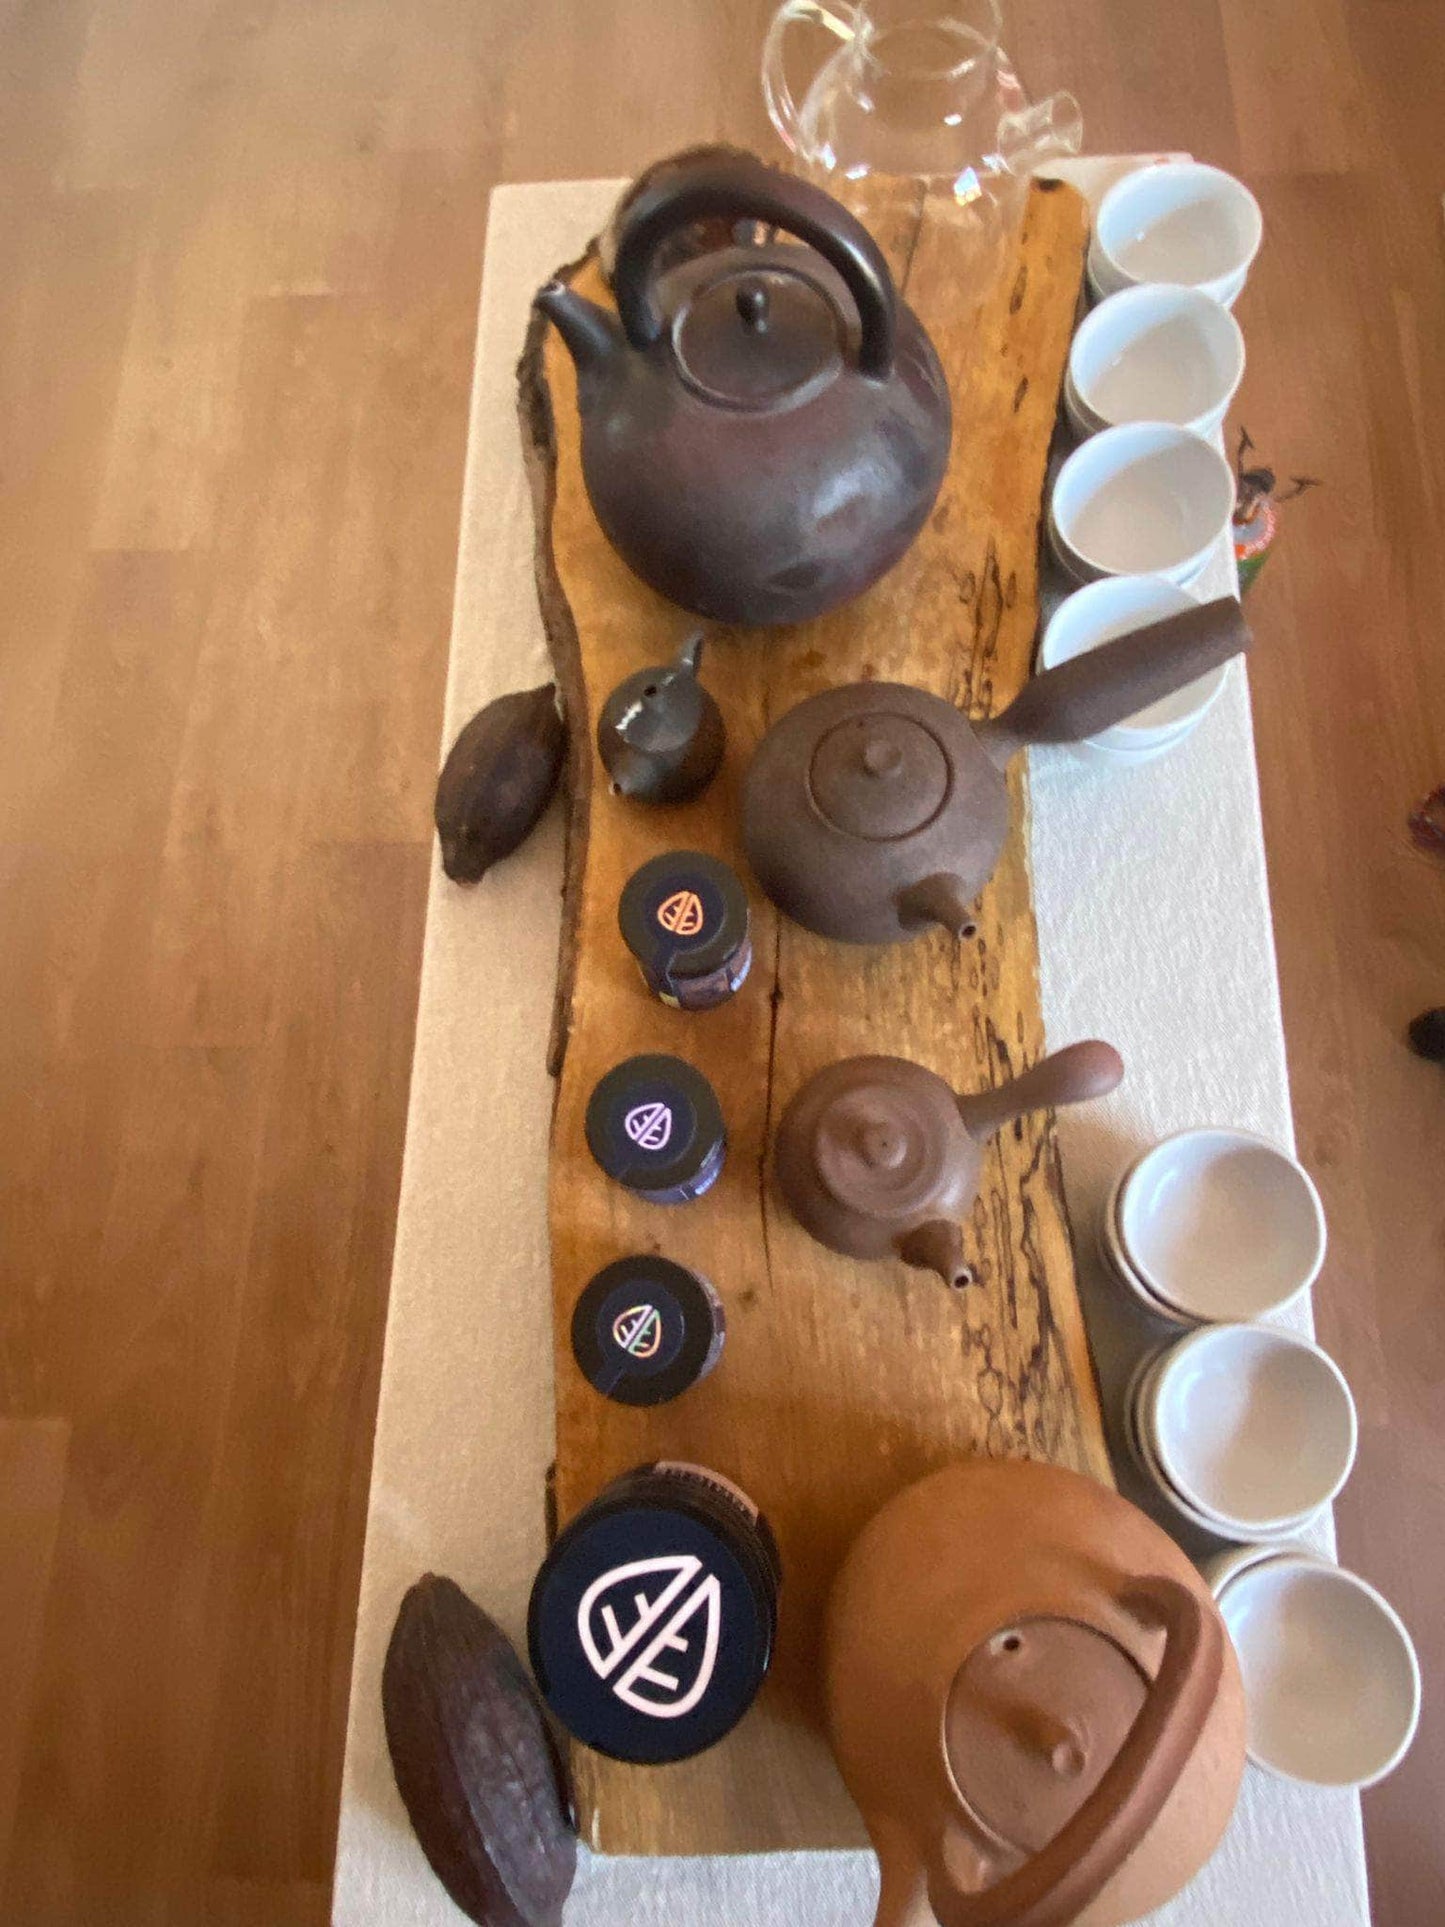 
                  
                    Ashby-de-la-Zouch, Ashby 8th June,  🍄 Root to Remedy 🍄 A Journey Through Medicinal Mushrooms, medicinal mushrooms, tea ceremony, events, experiences, chocolate, cacao
                  
                